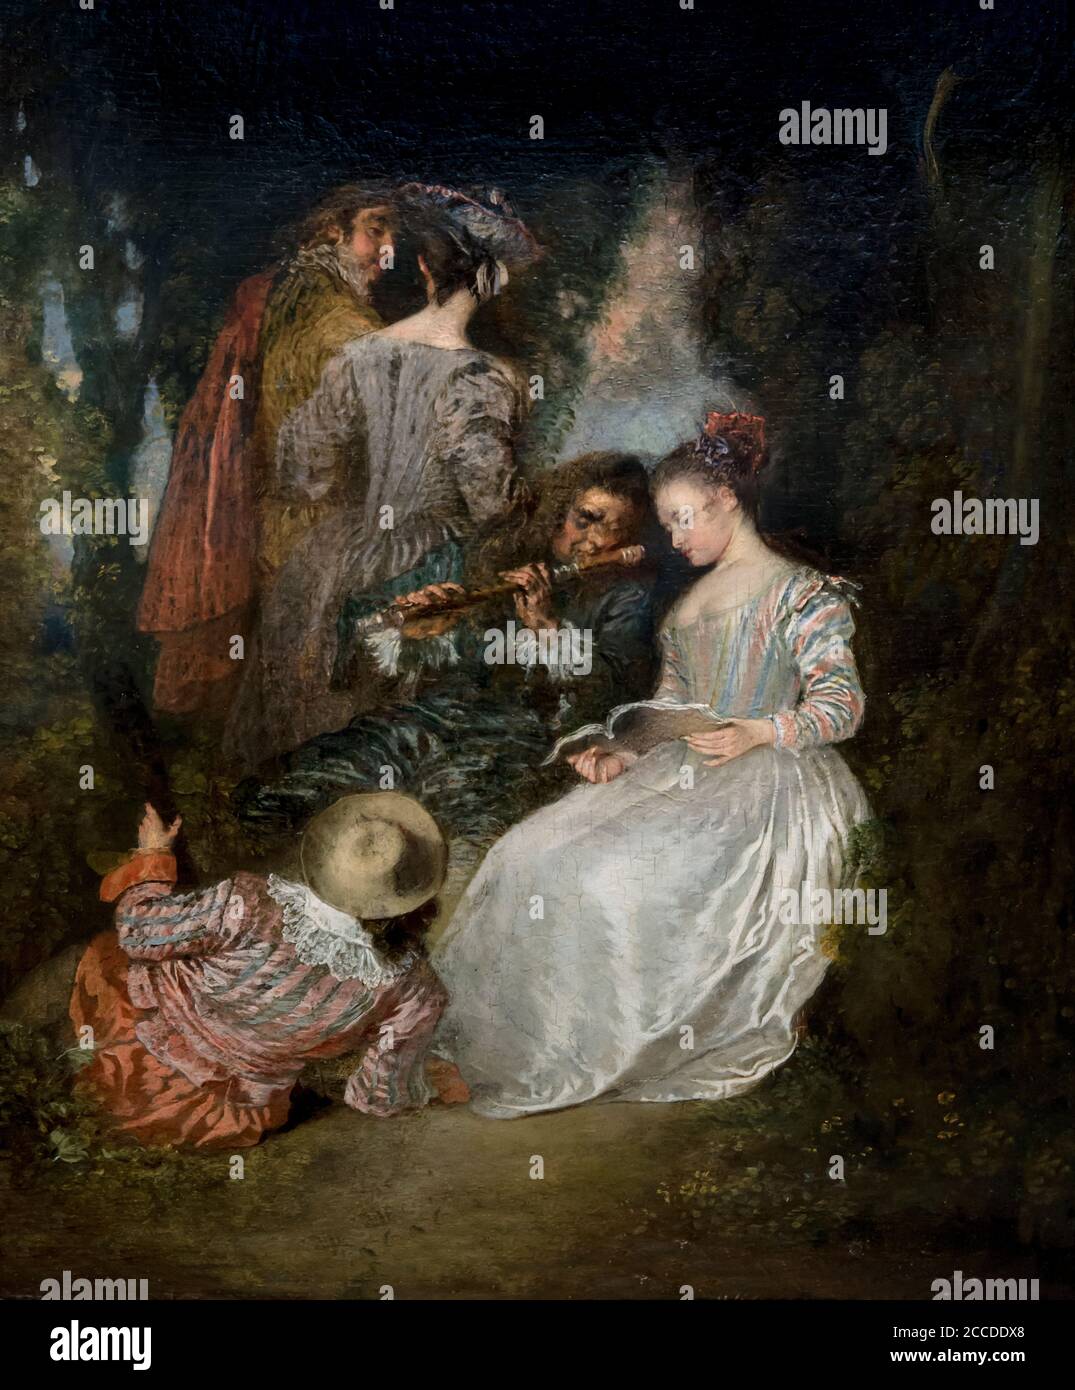 The Perfect Accord, Perfect Harmony, Antoine Watteau, 1719, Los Angeles County Museum of Art, Los Angeles, California, USA, North America Stock Photo